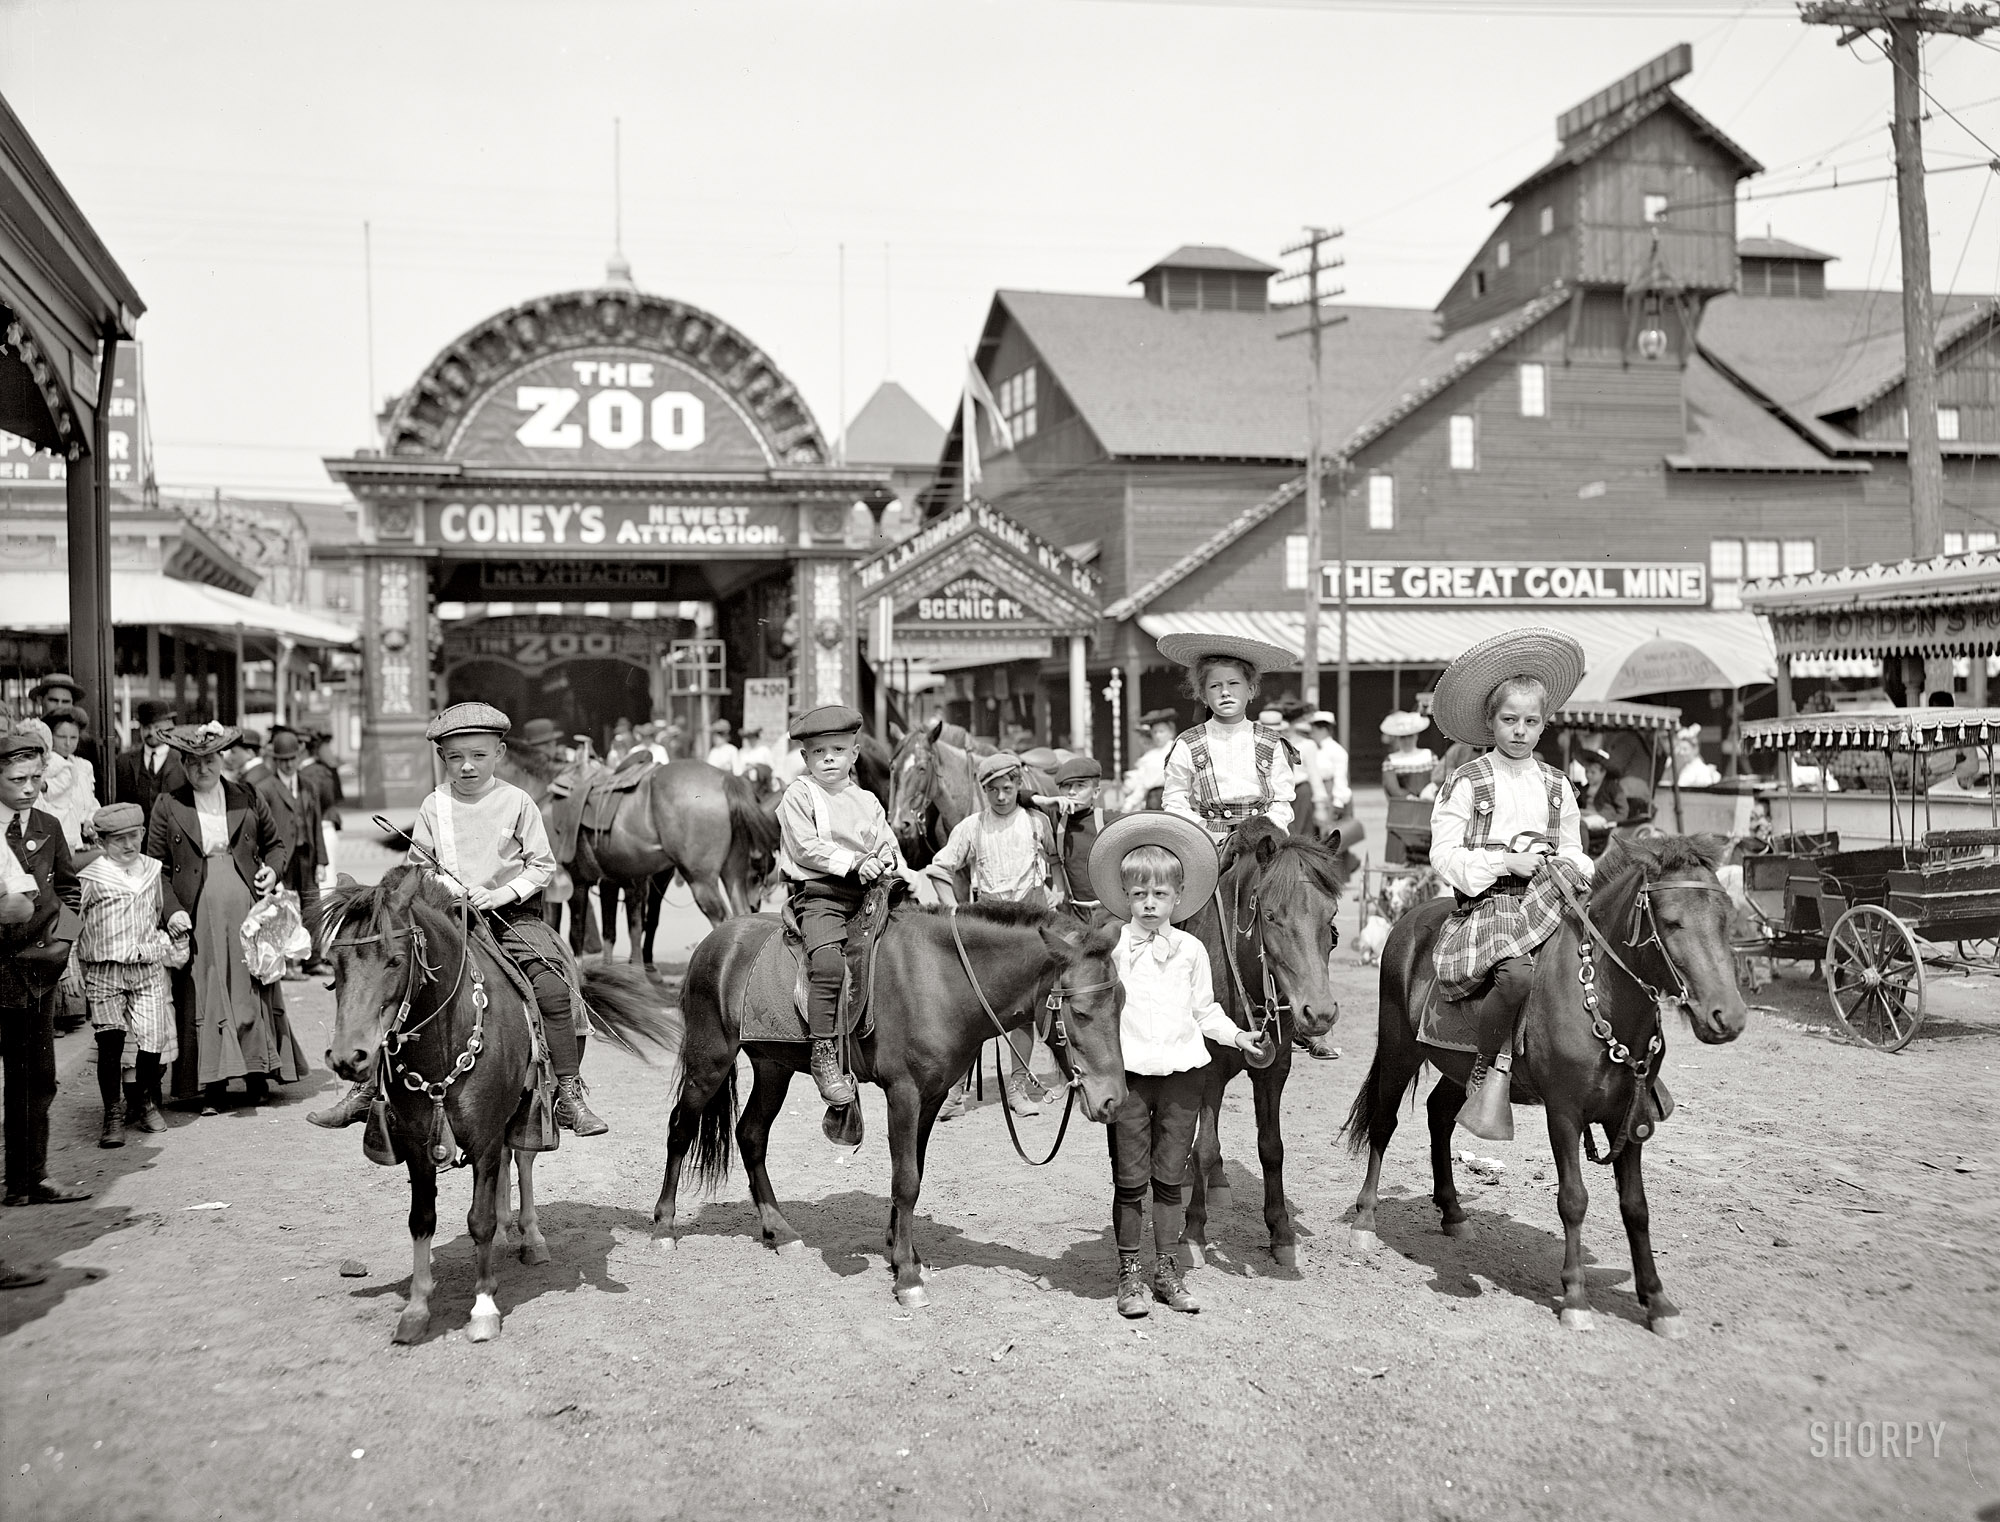 New York circa 1904. "The ponies, Coney Island." 8x10 inch dry plate glass negative, Detroit Publishing Company. View full size.